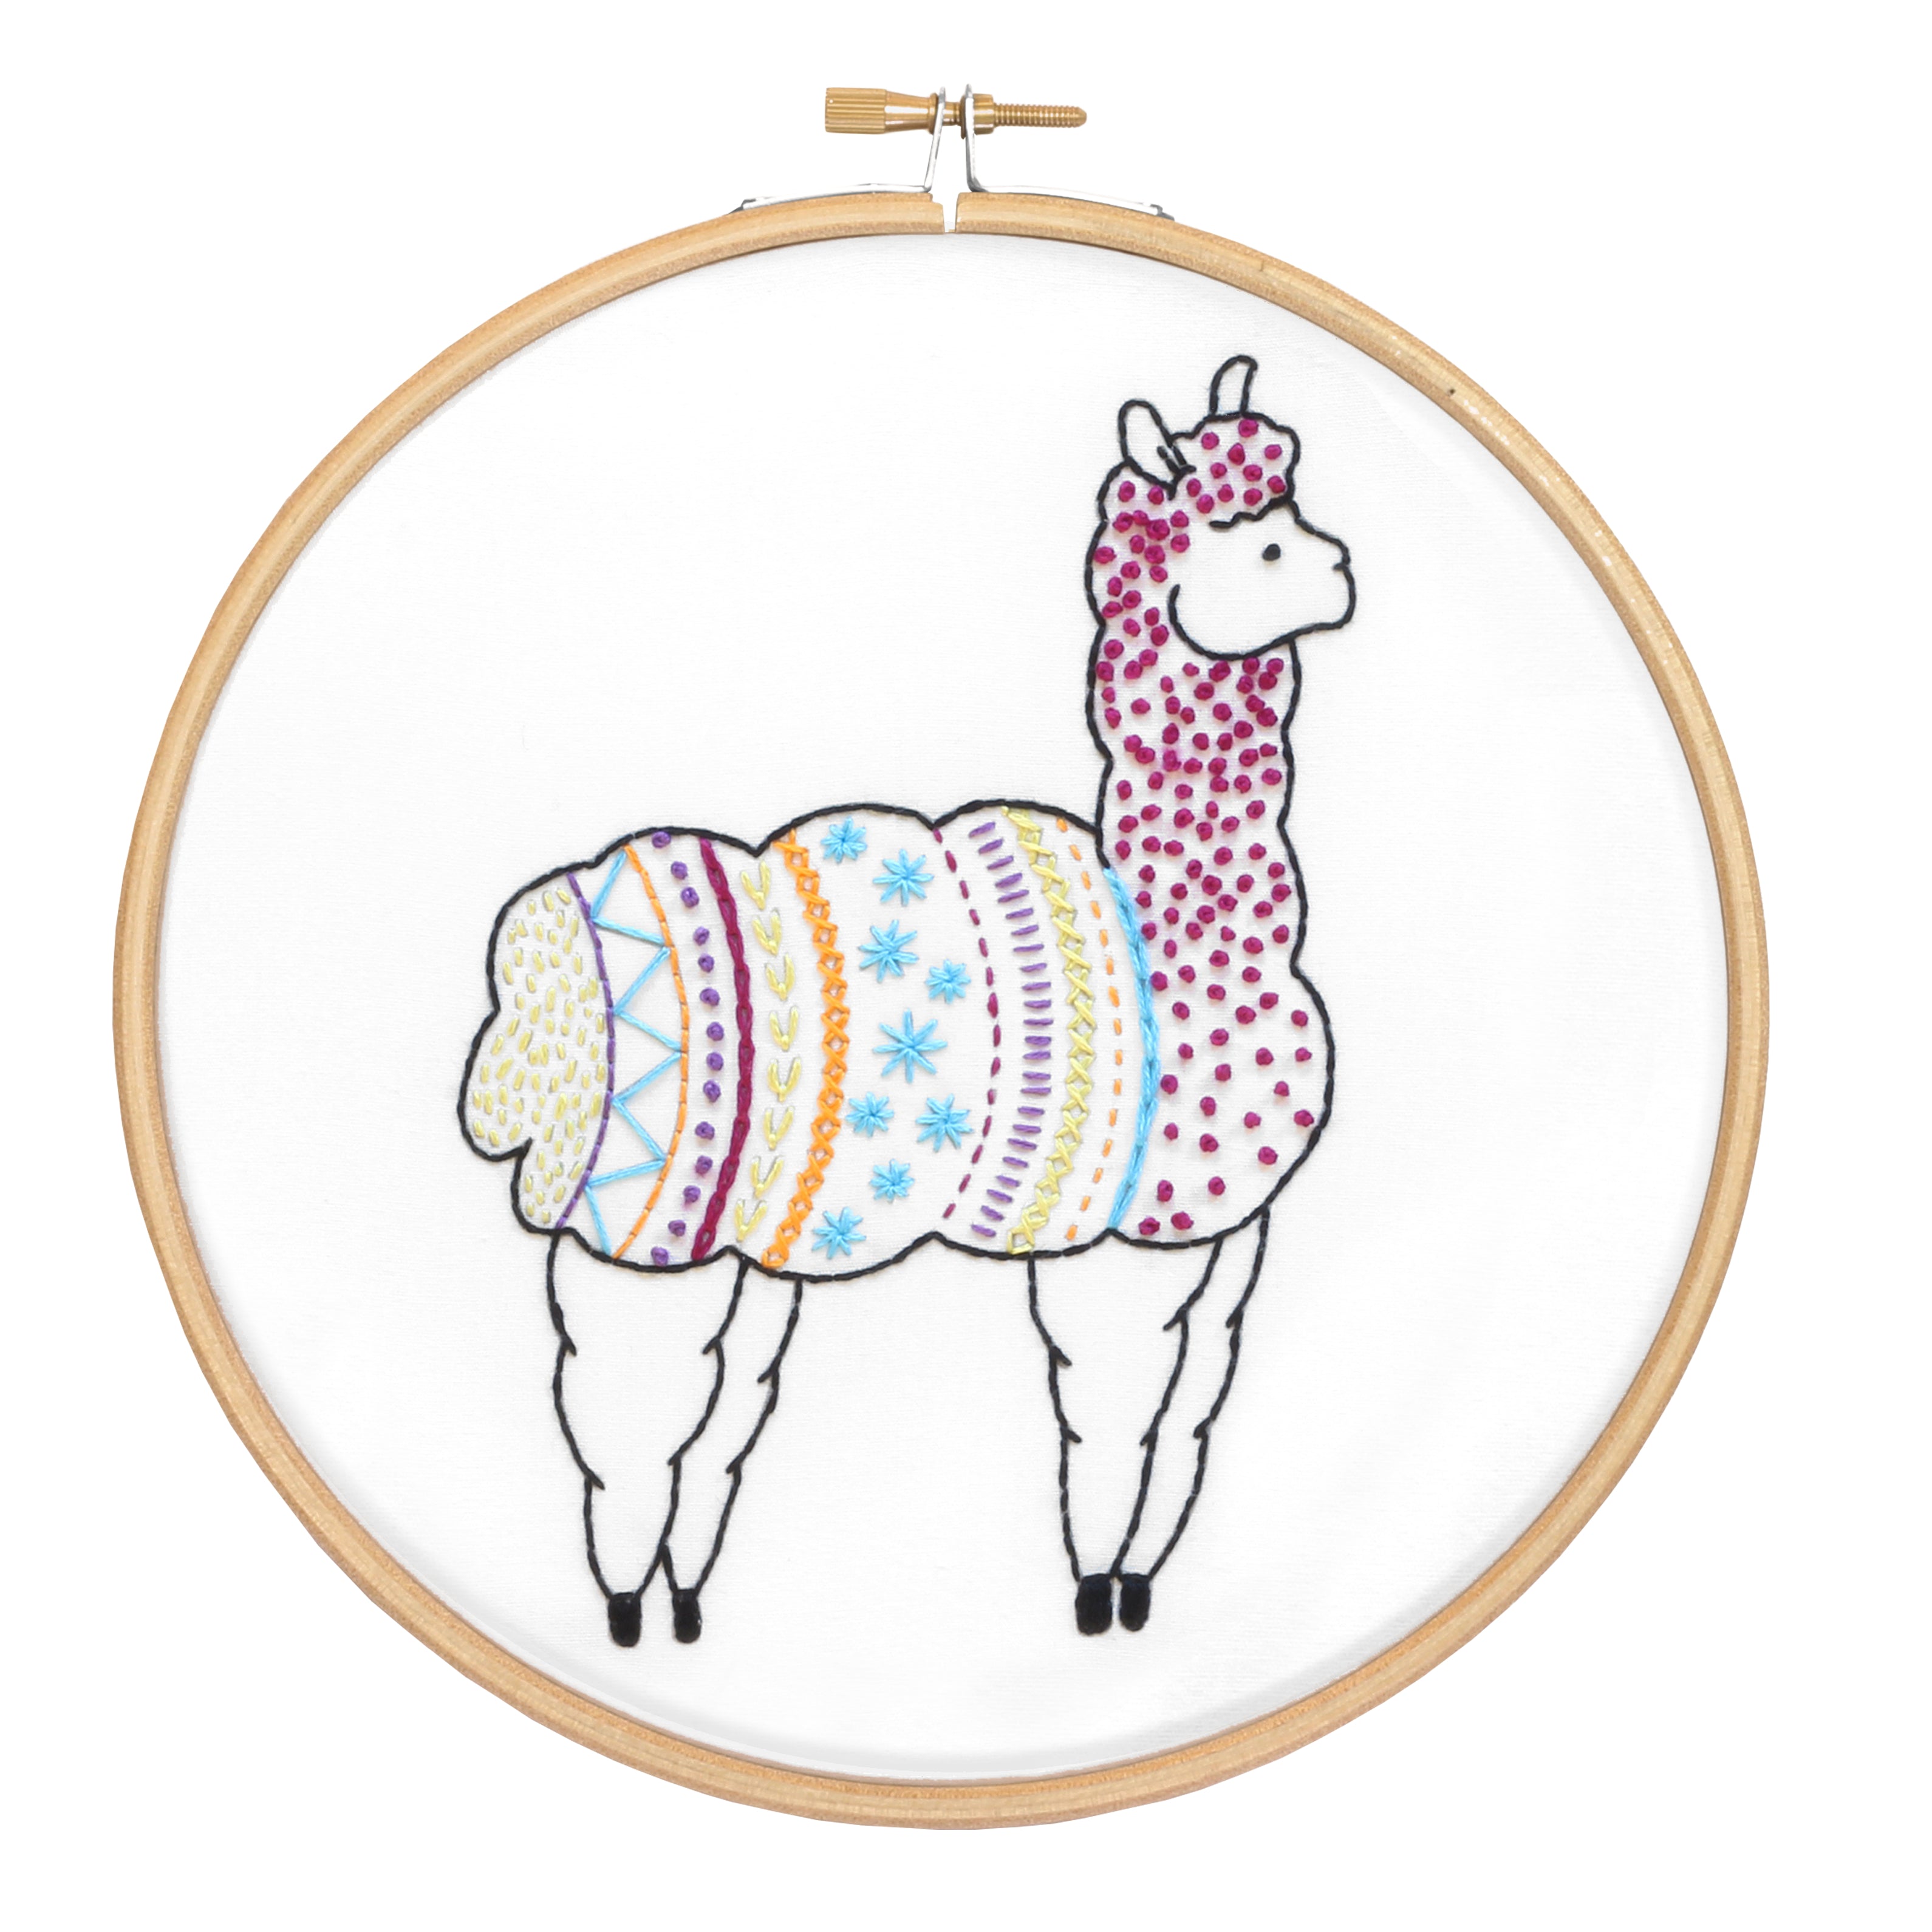 Clipped Image of Alpaca Embroidery Kit